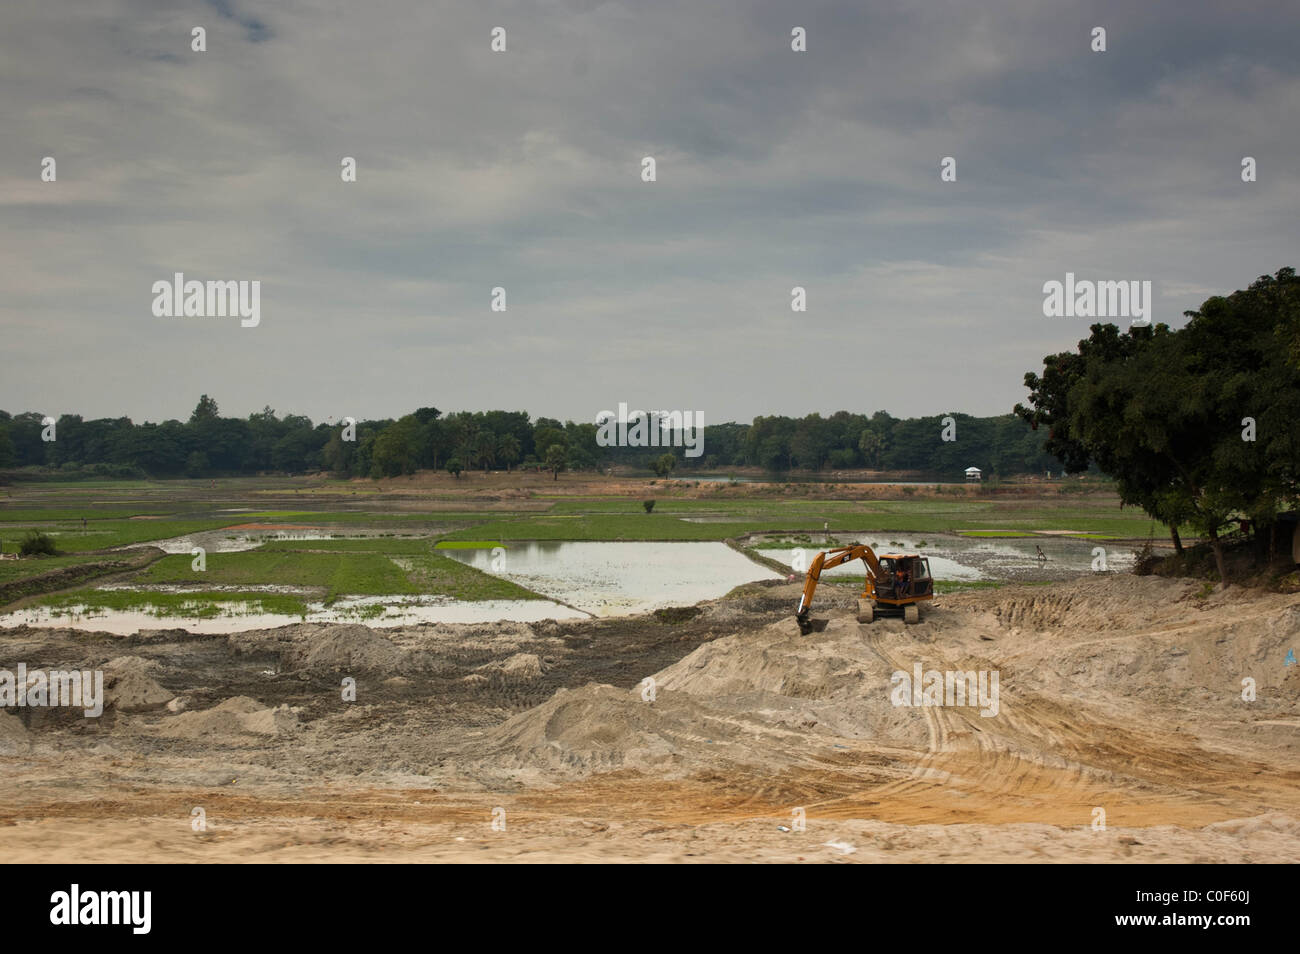 A JCB digger working on a construction site in the foreground, with rice paddy fields in the background in Bangladesh Stock Photo